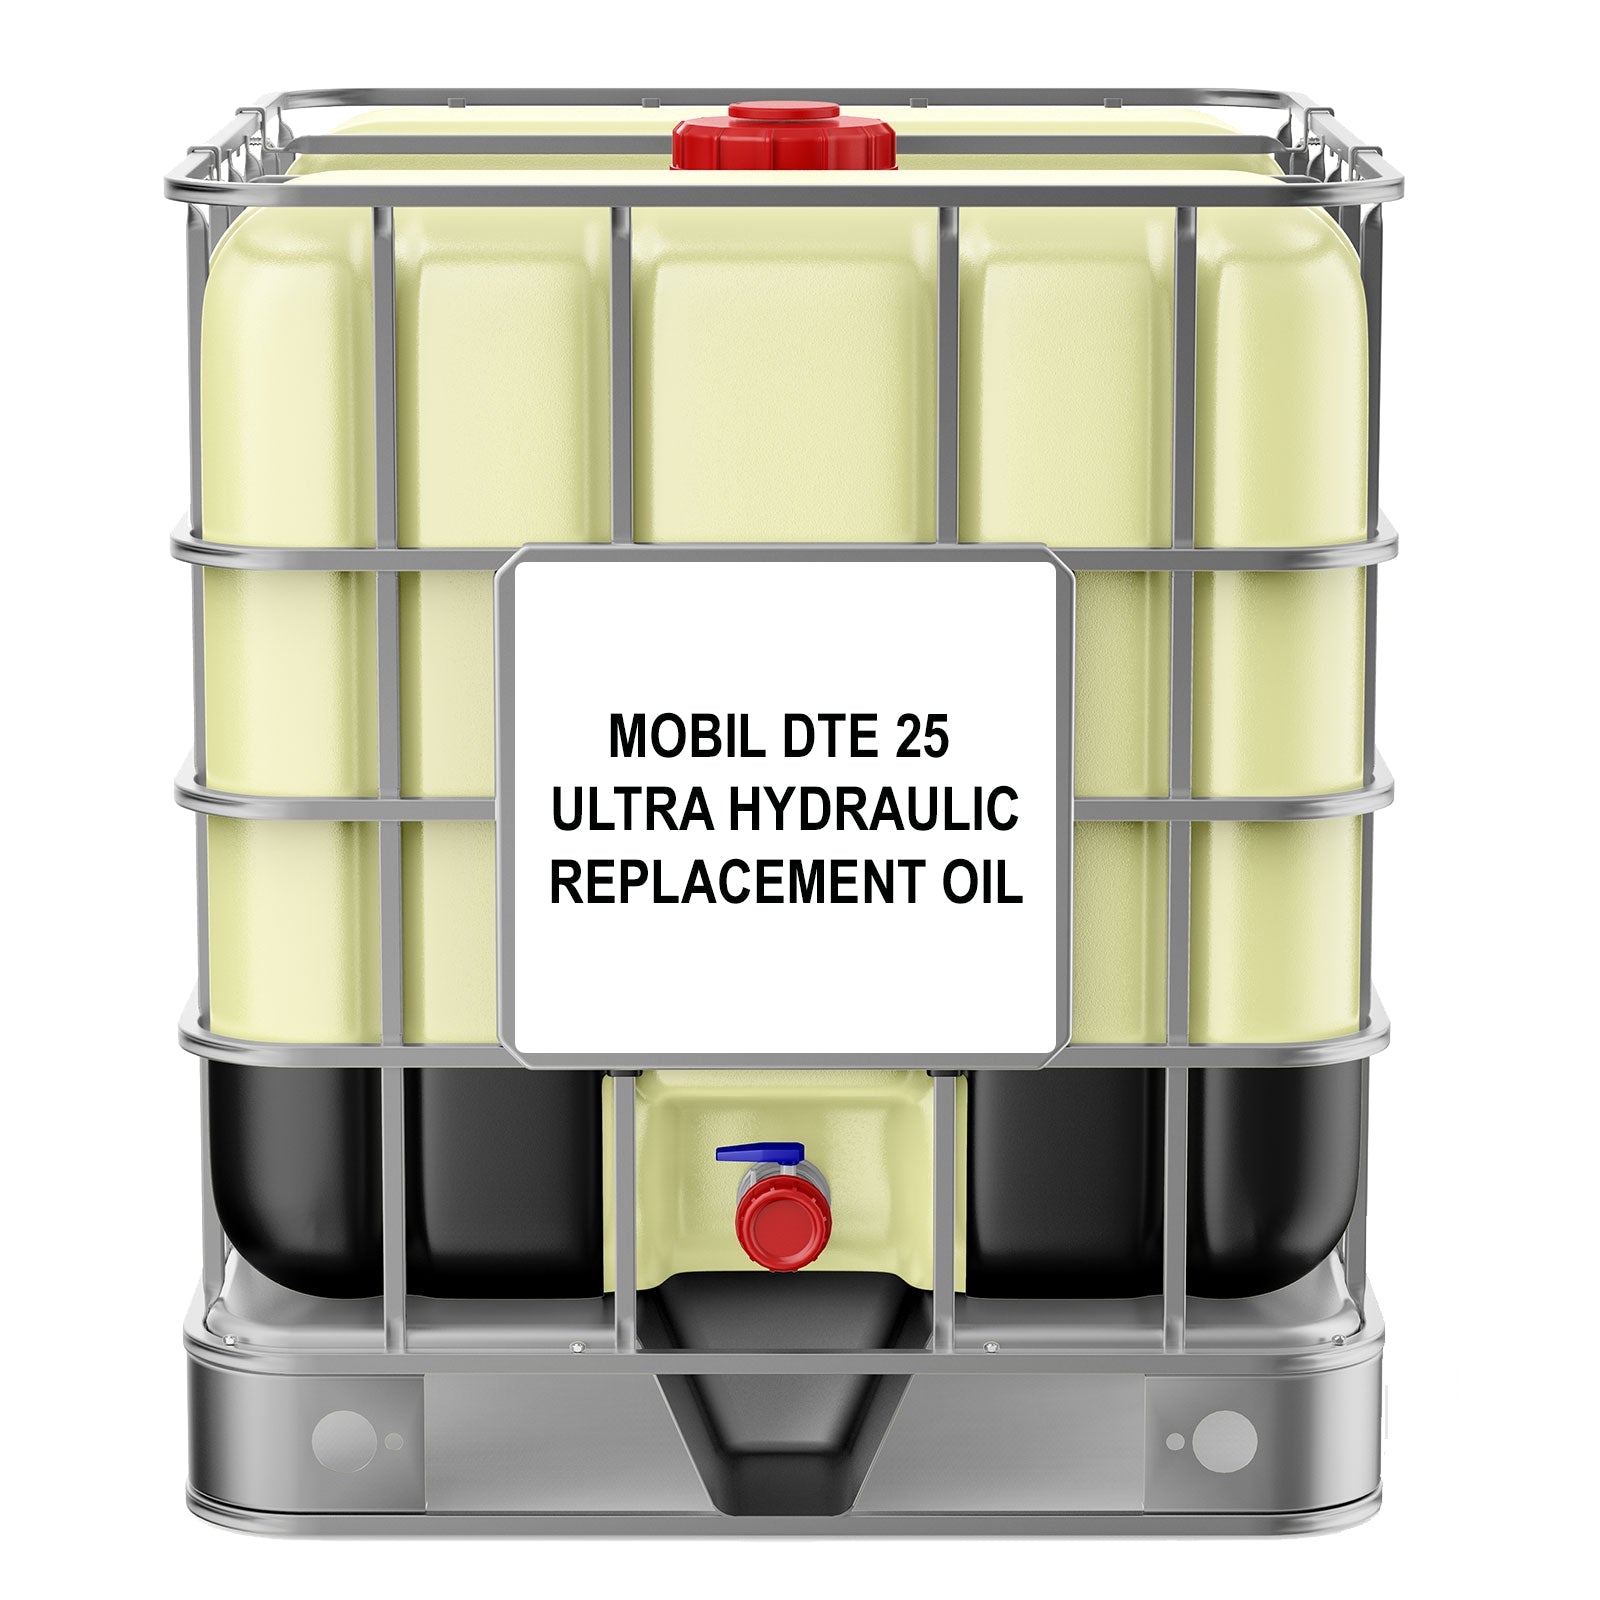 Mobil DTE 25 Ultra Hydraulic Replacement Oil by RDT - 275 Gallon Tote